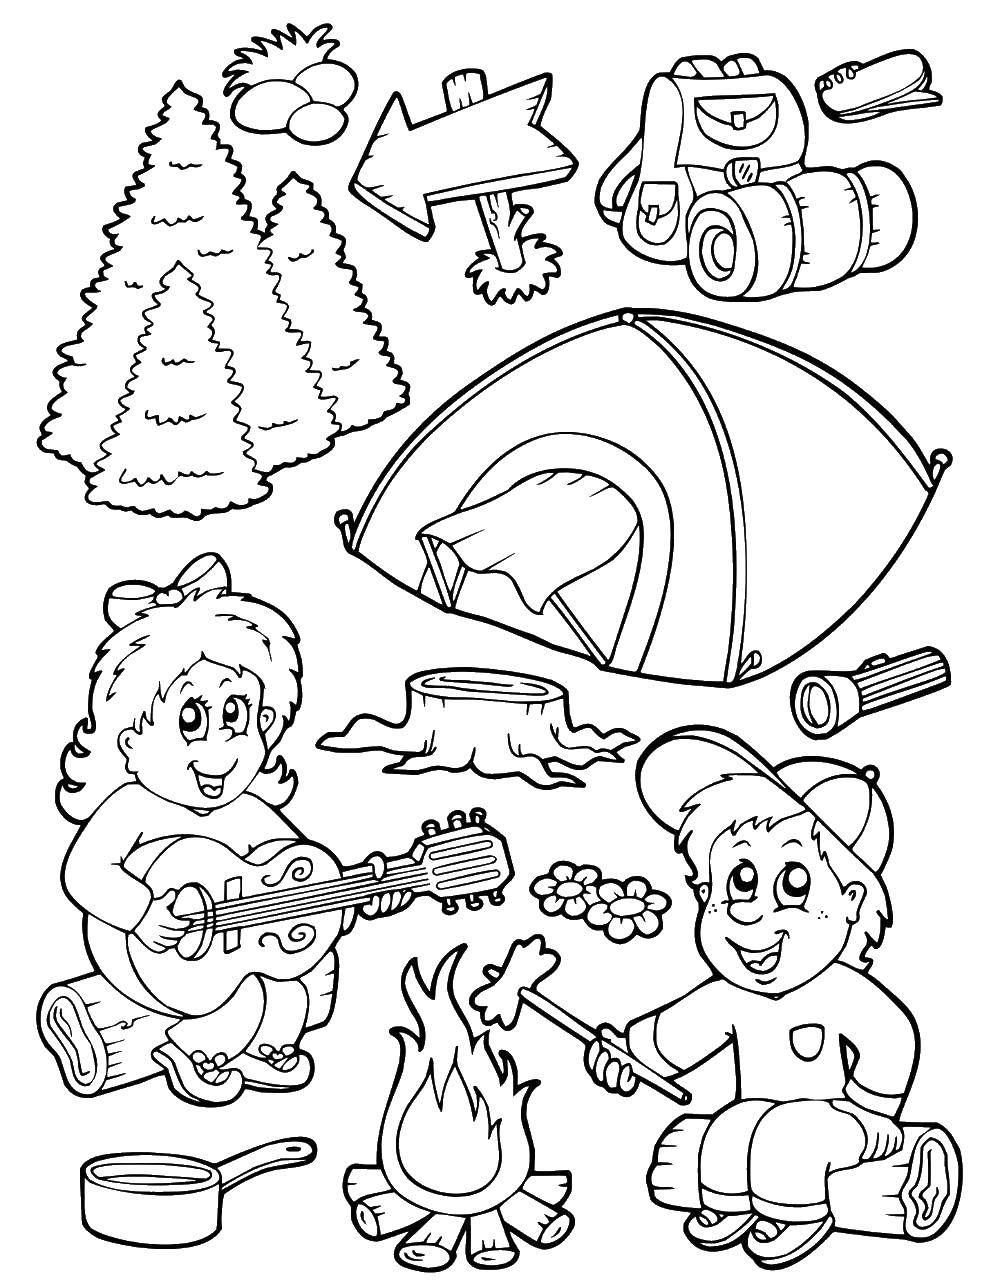 Coloring Children of the fire. Category Camping. Tags:  boy, girl, tent, campfire.